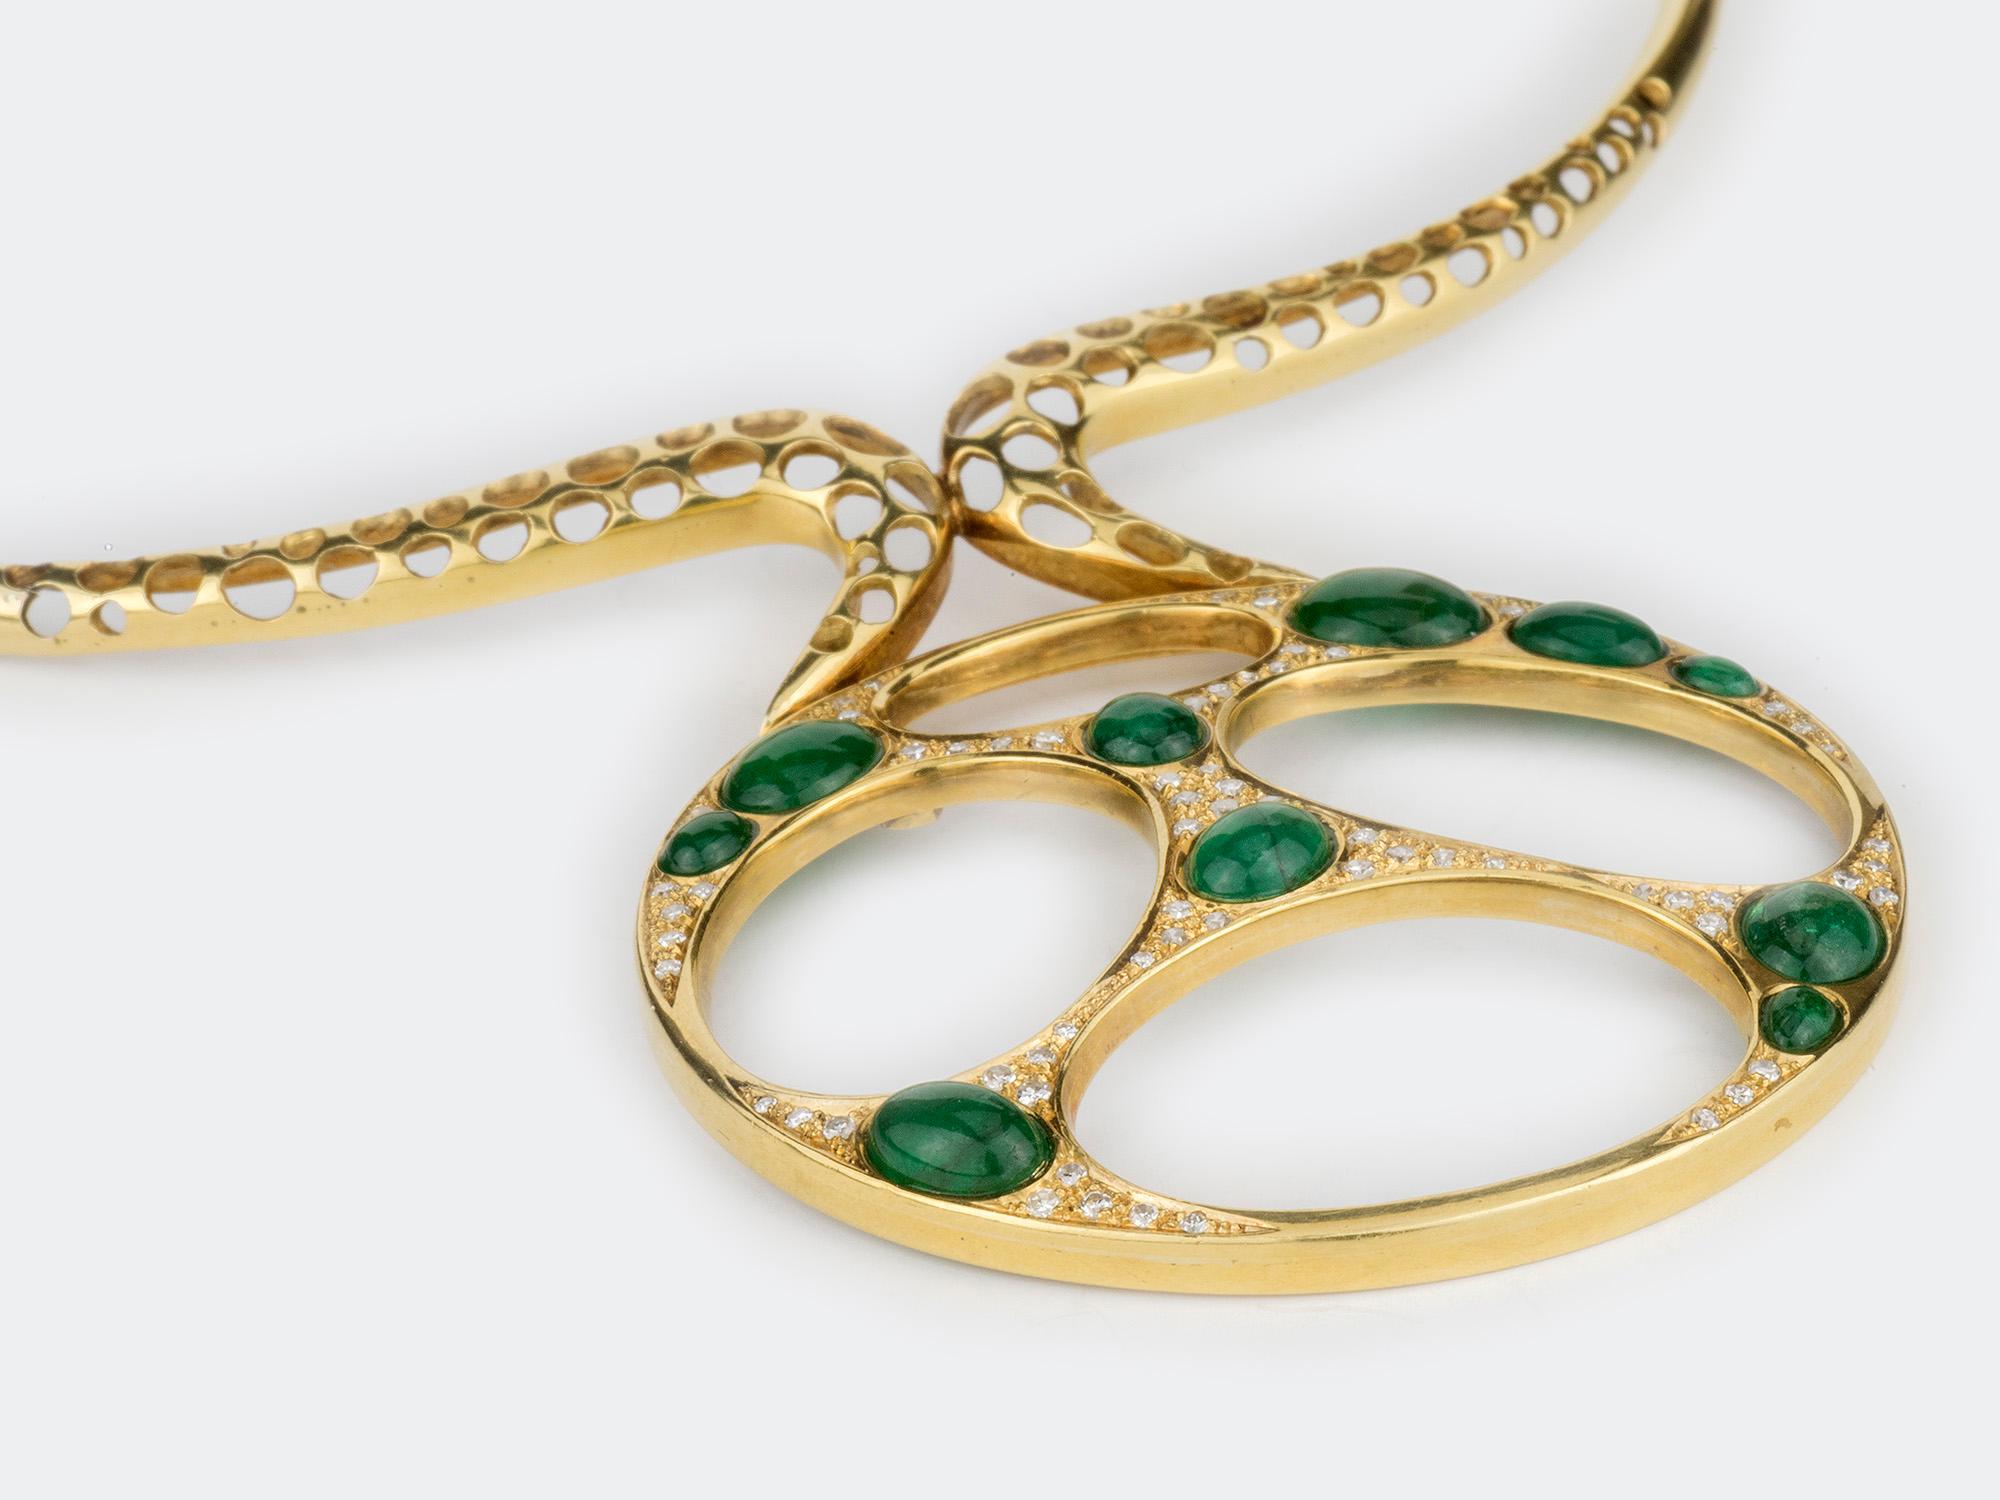 18k gold Torque Necklace suspending a round disc pendant set with cabochon emeralds.Emerald weight approximately 4.50 carats. Gold mark.